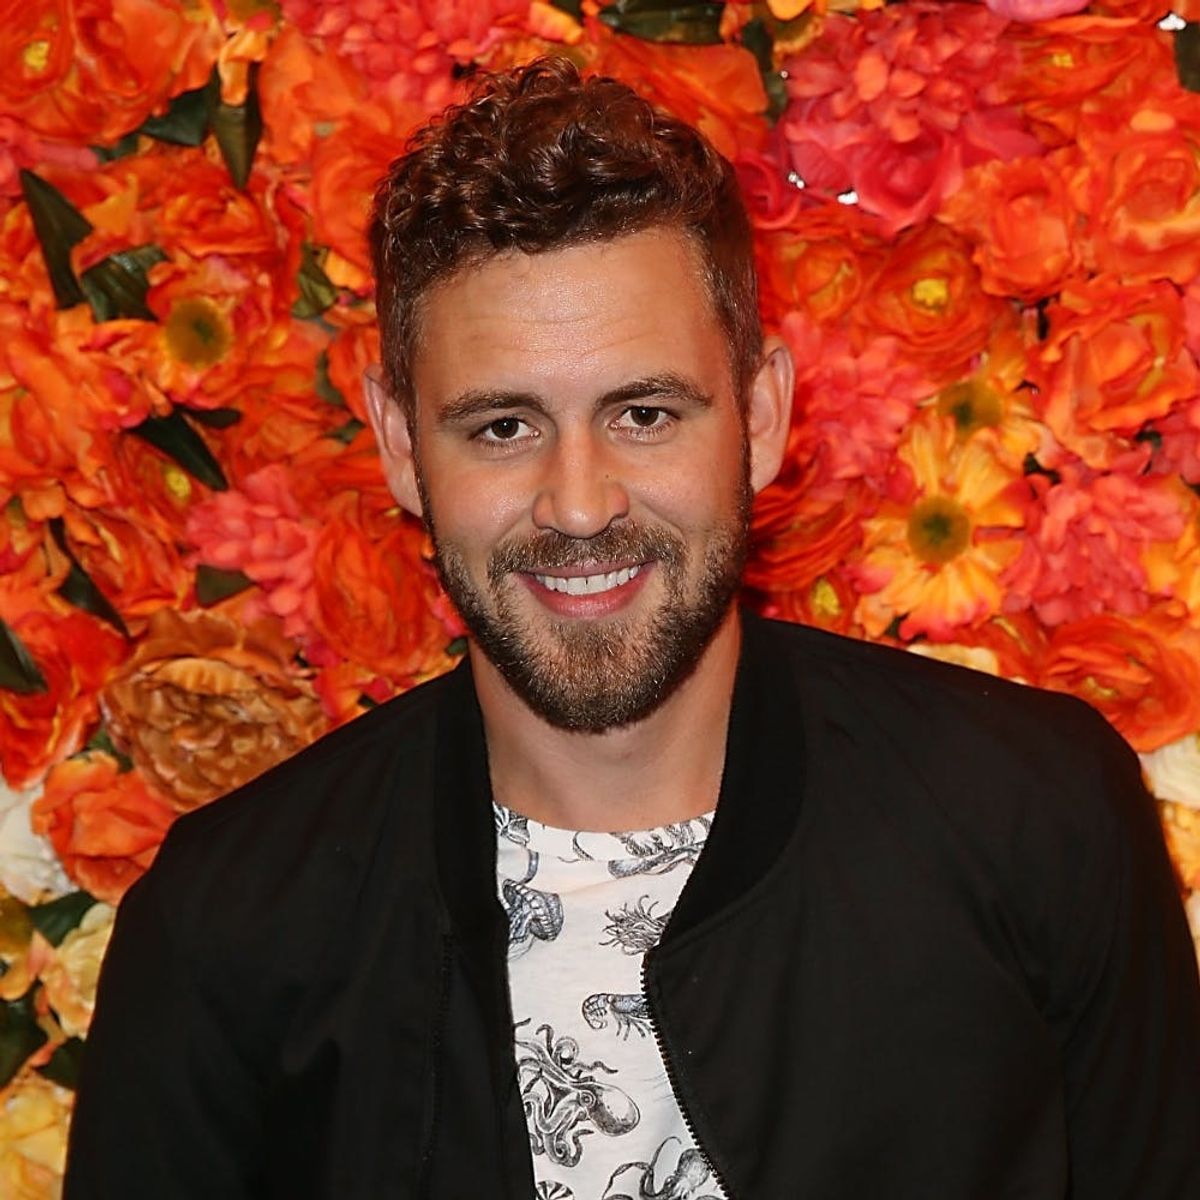 New Pics of Nick Viall As the Bachelor Already Show One Lady in a Wedding Veil